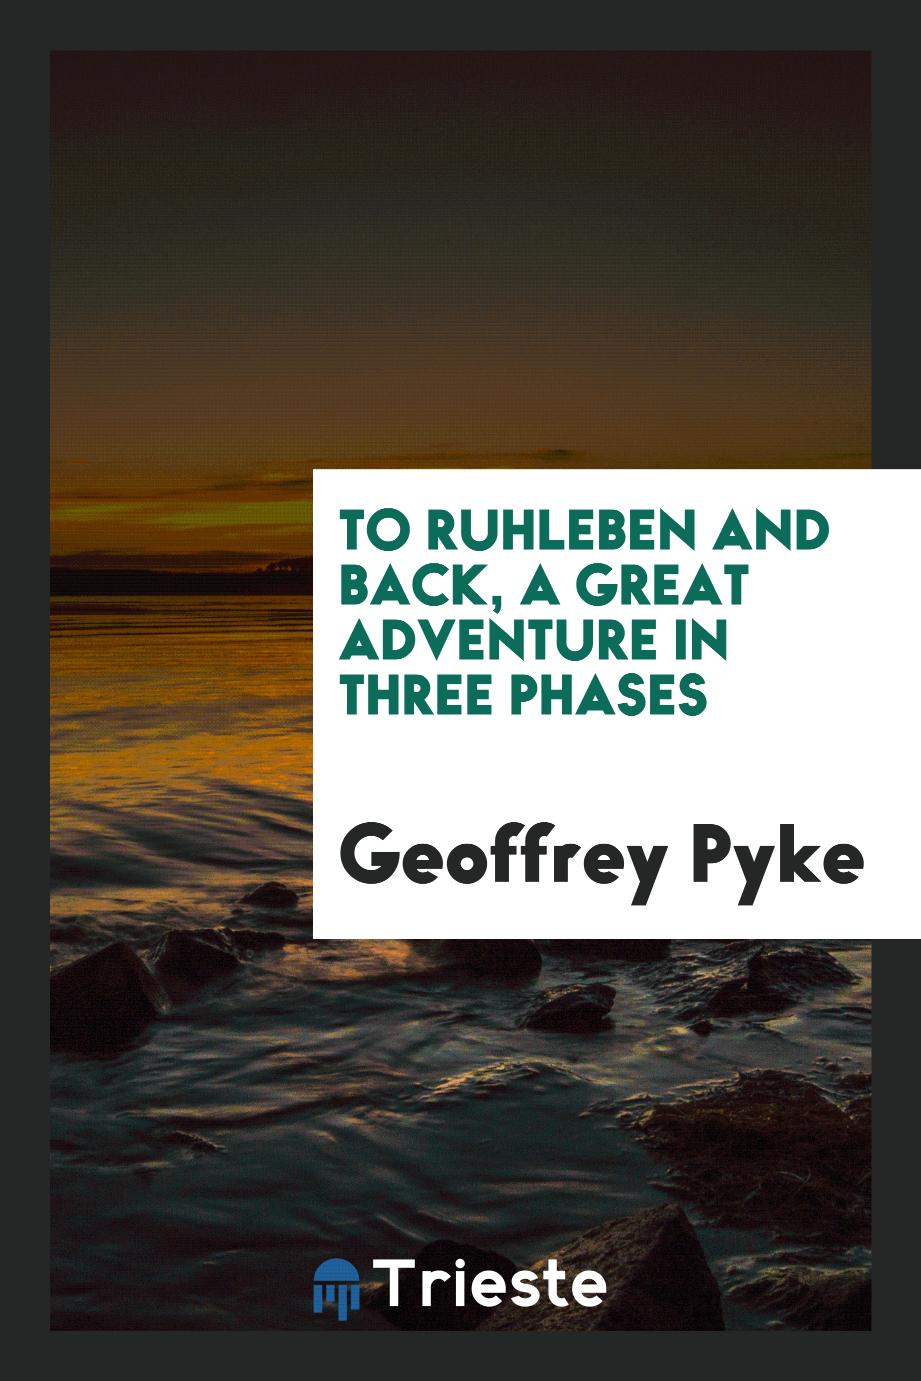 To Ruhleben and back, a great adventure in three phases